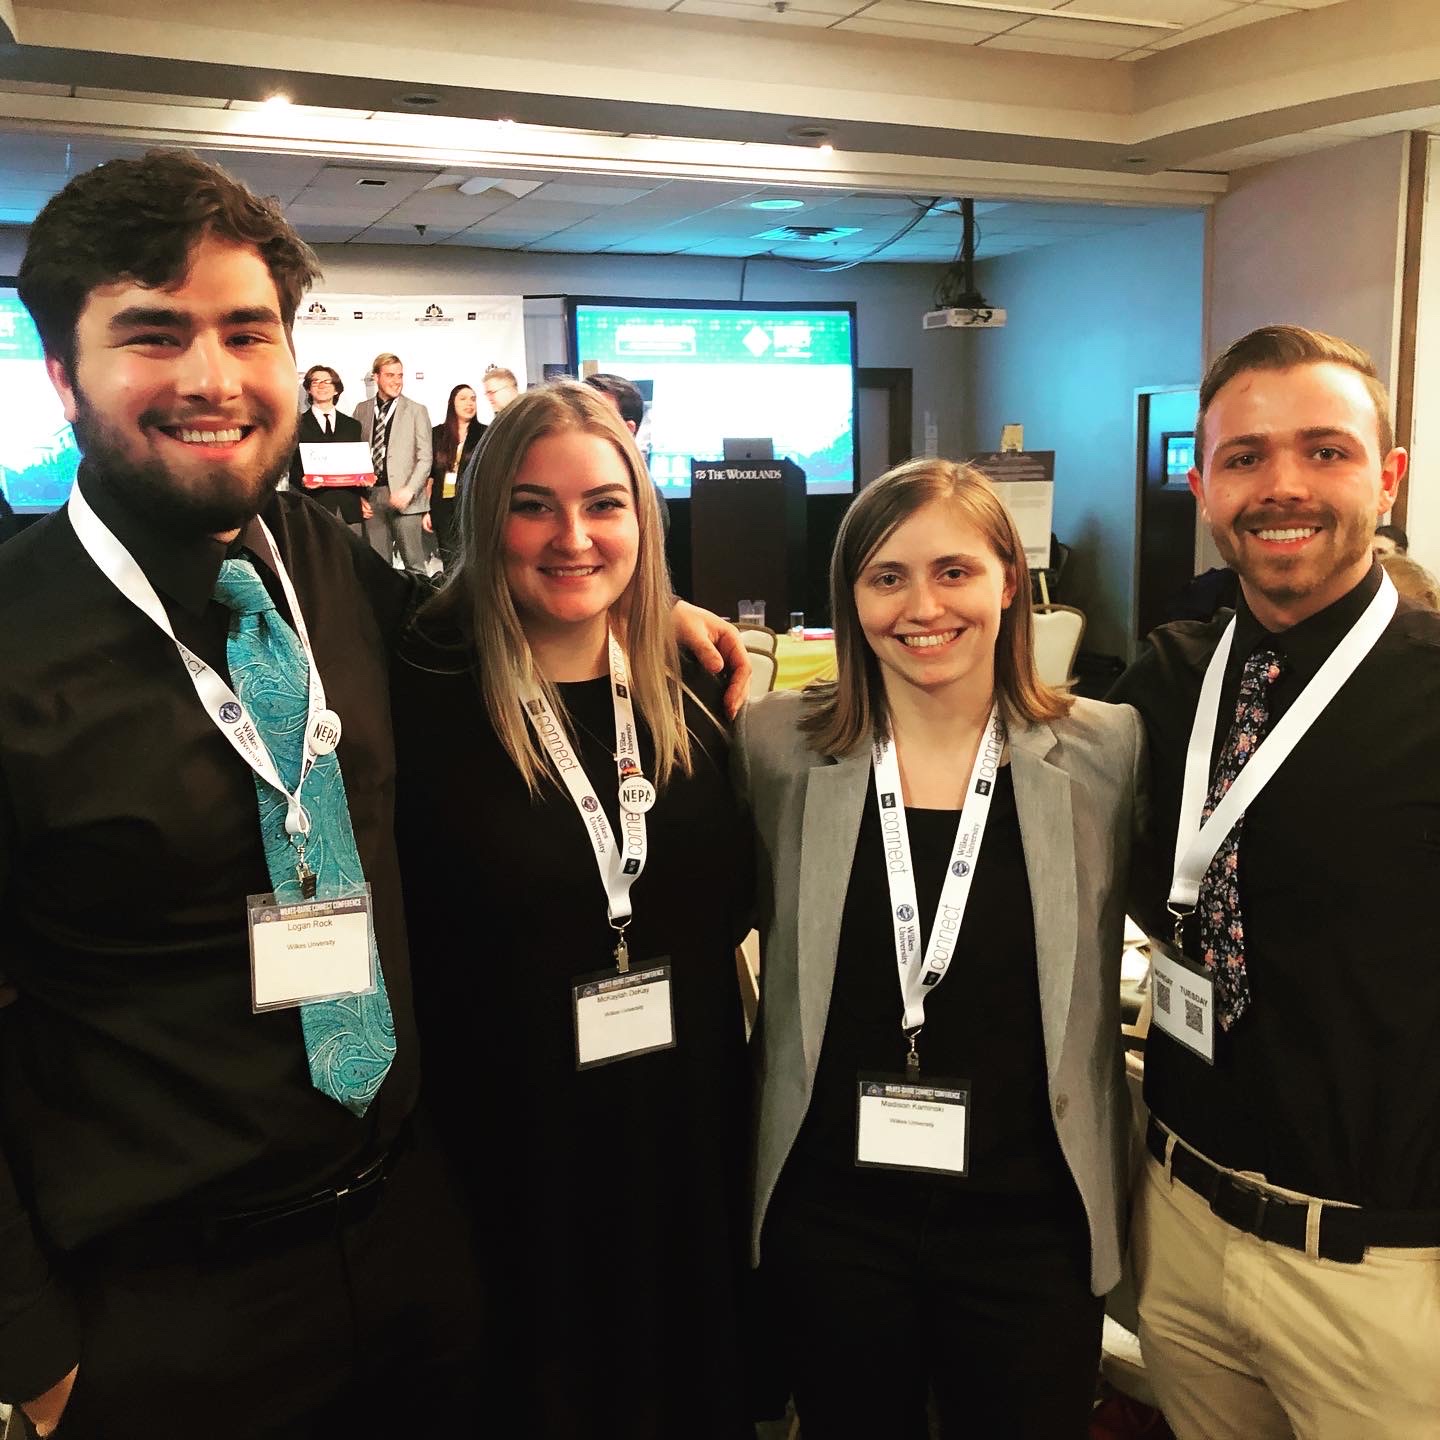 Wilkes University digital design and media art students win statewide marketing competition